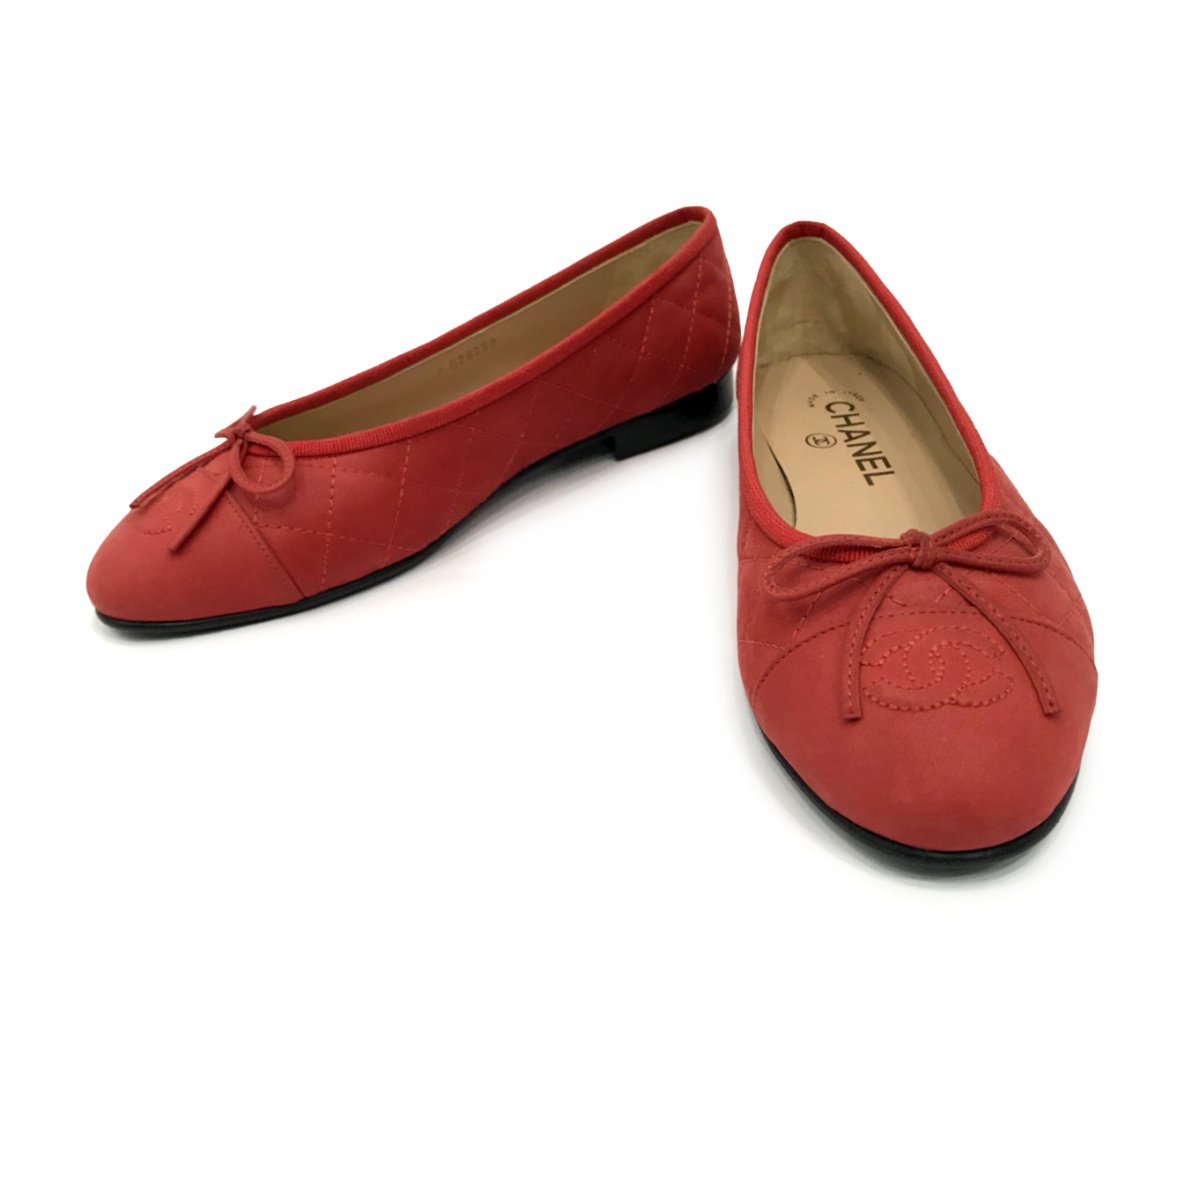 New Chanel Flat Shoes 37 in Red Fabric - moppetbrandname